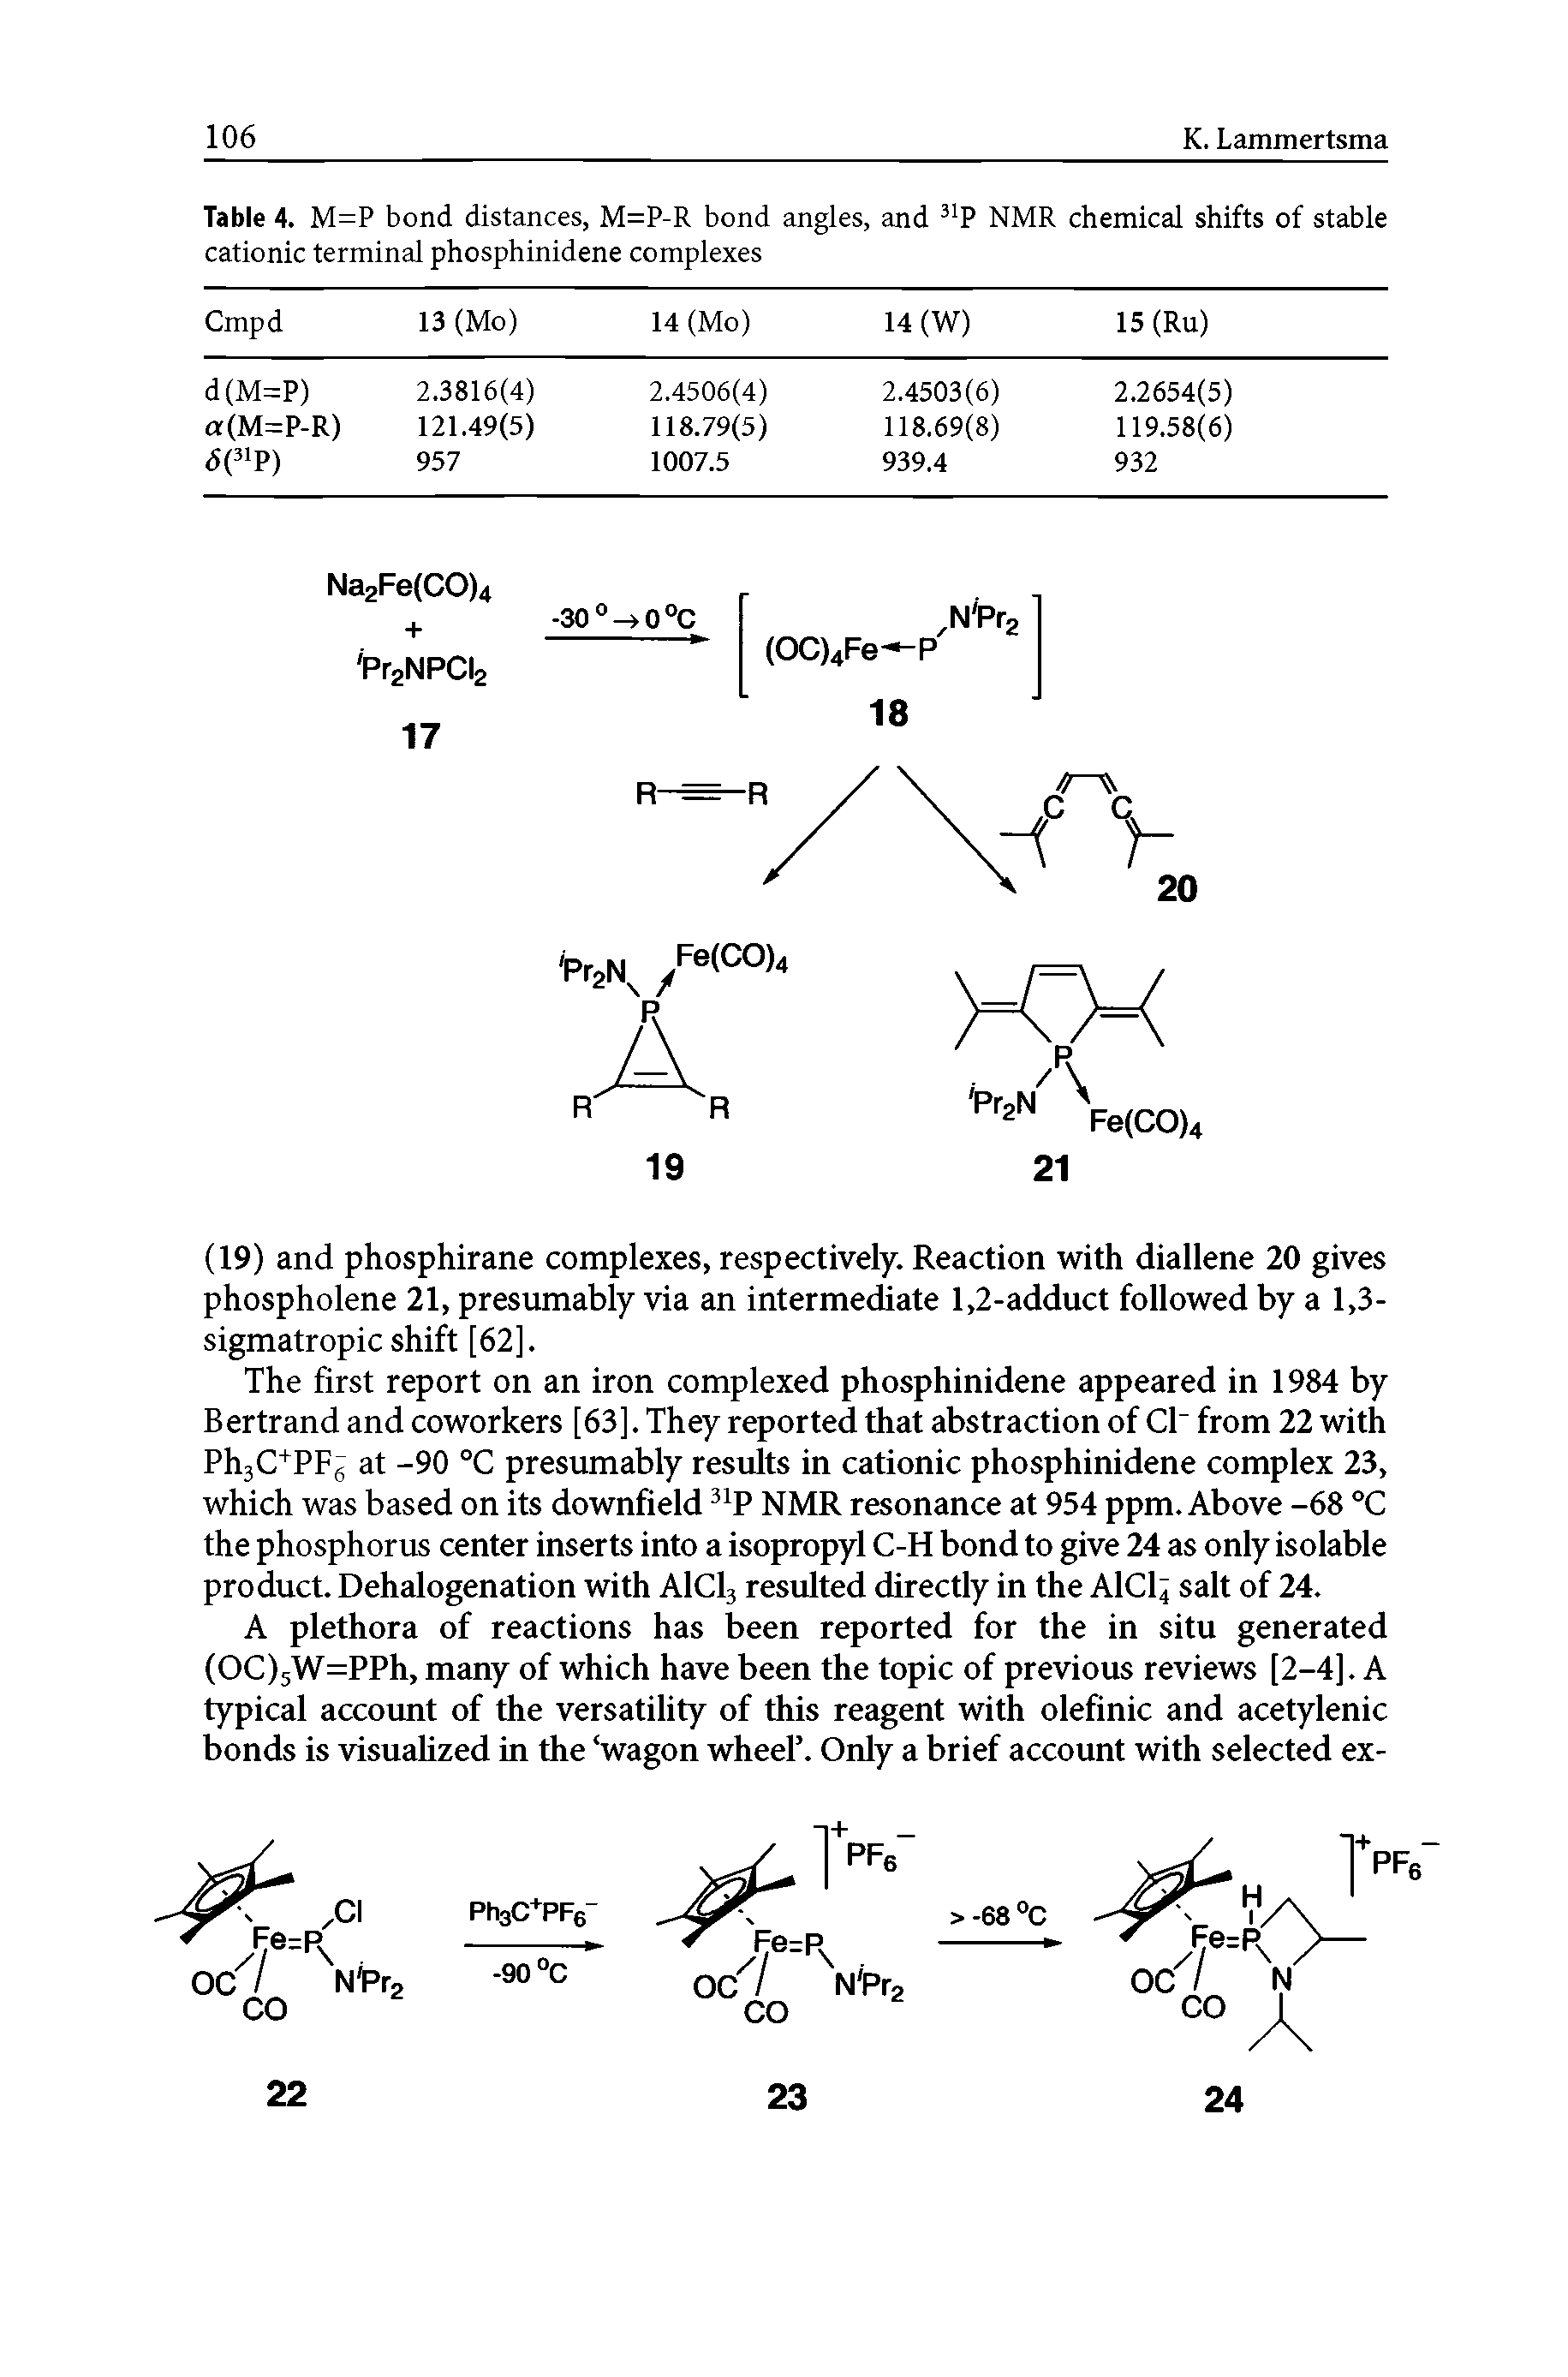 Table 4. M=P bond distances, M=P-R bond angles, and P NMR chemical shifts of stable cationic terminal phosphinidene complexes ...